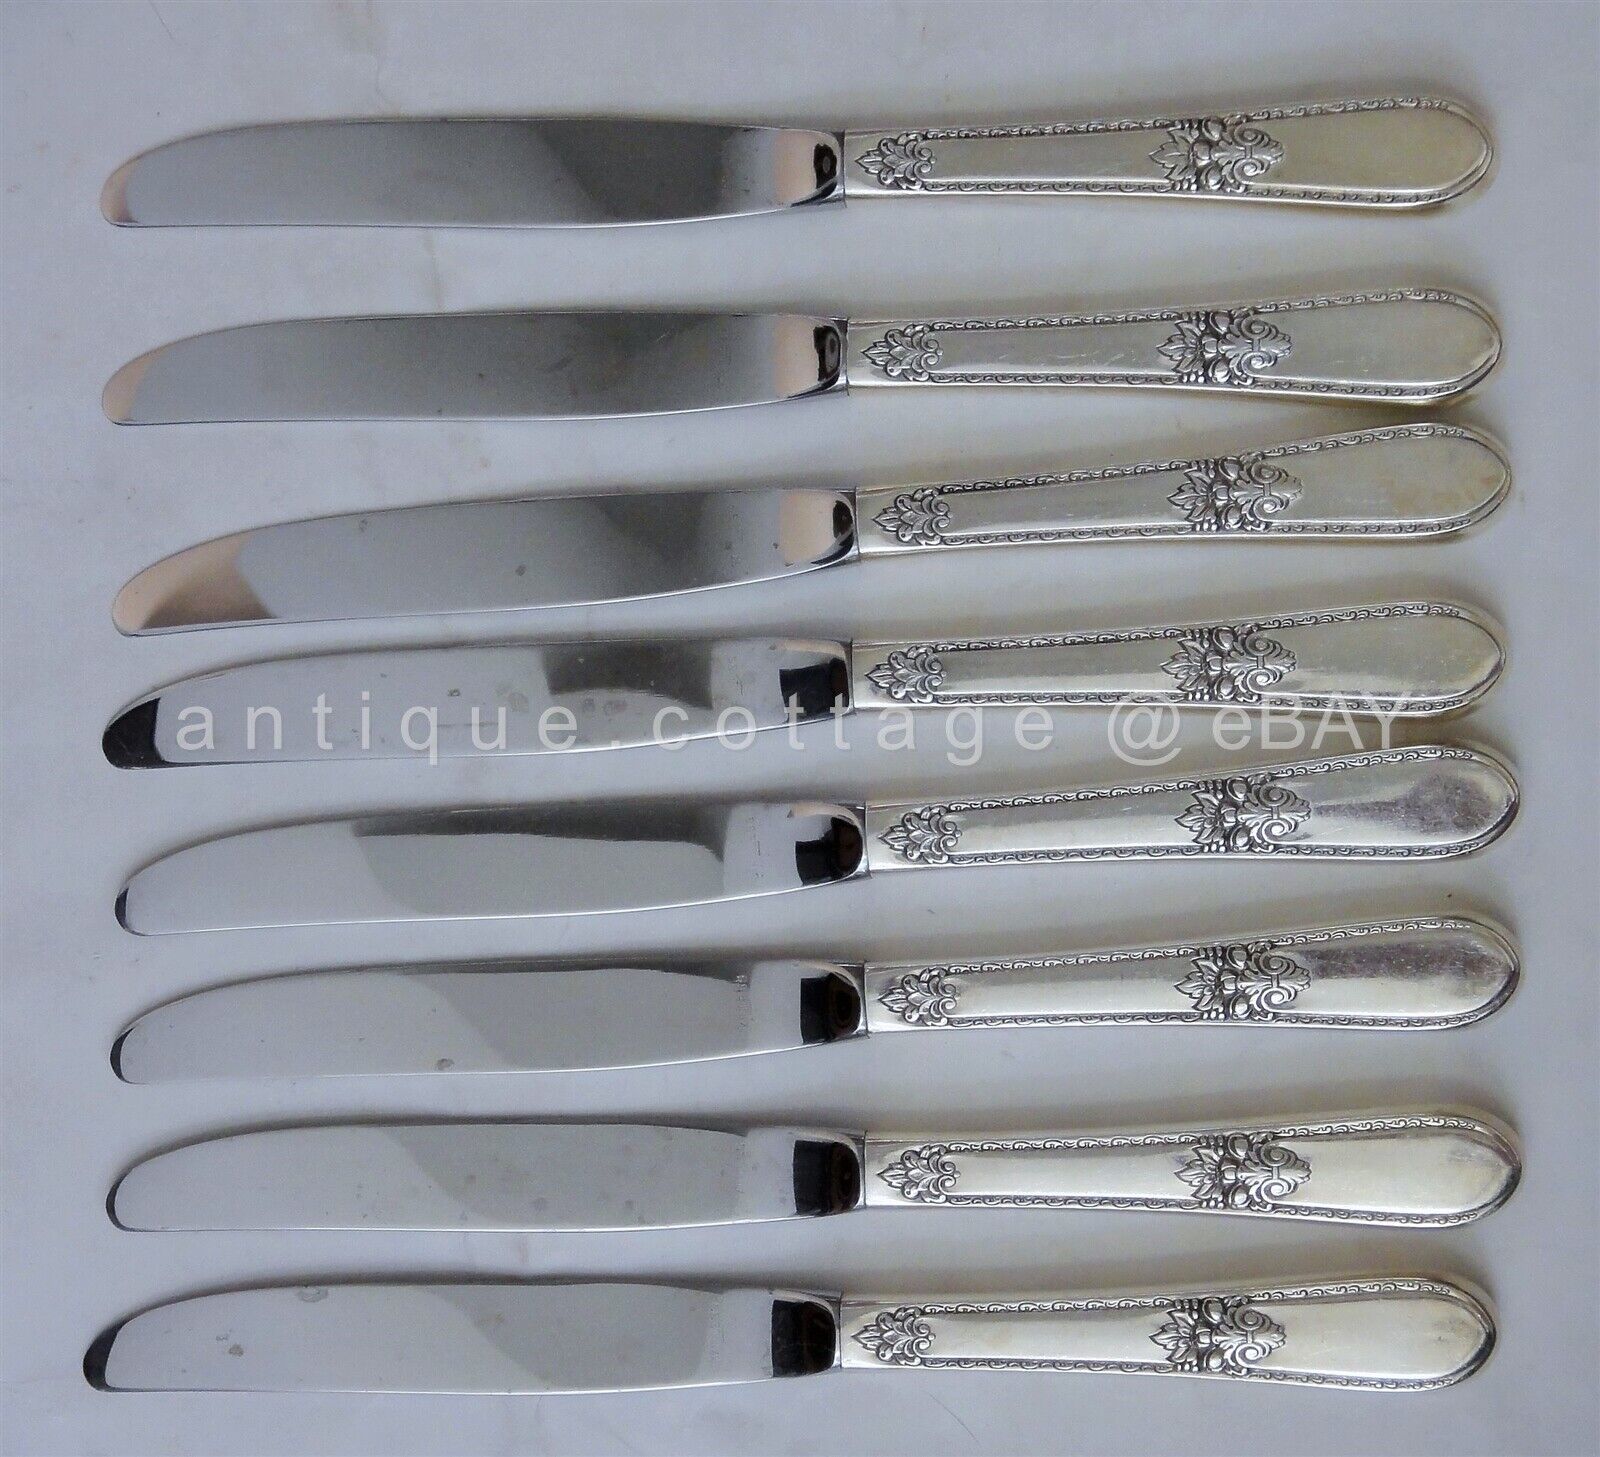 1930 antique 1847 ROGERS SILVERPLATE FLATWARE ADORATION 8pc dinner knives - $38.56